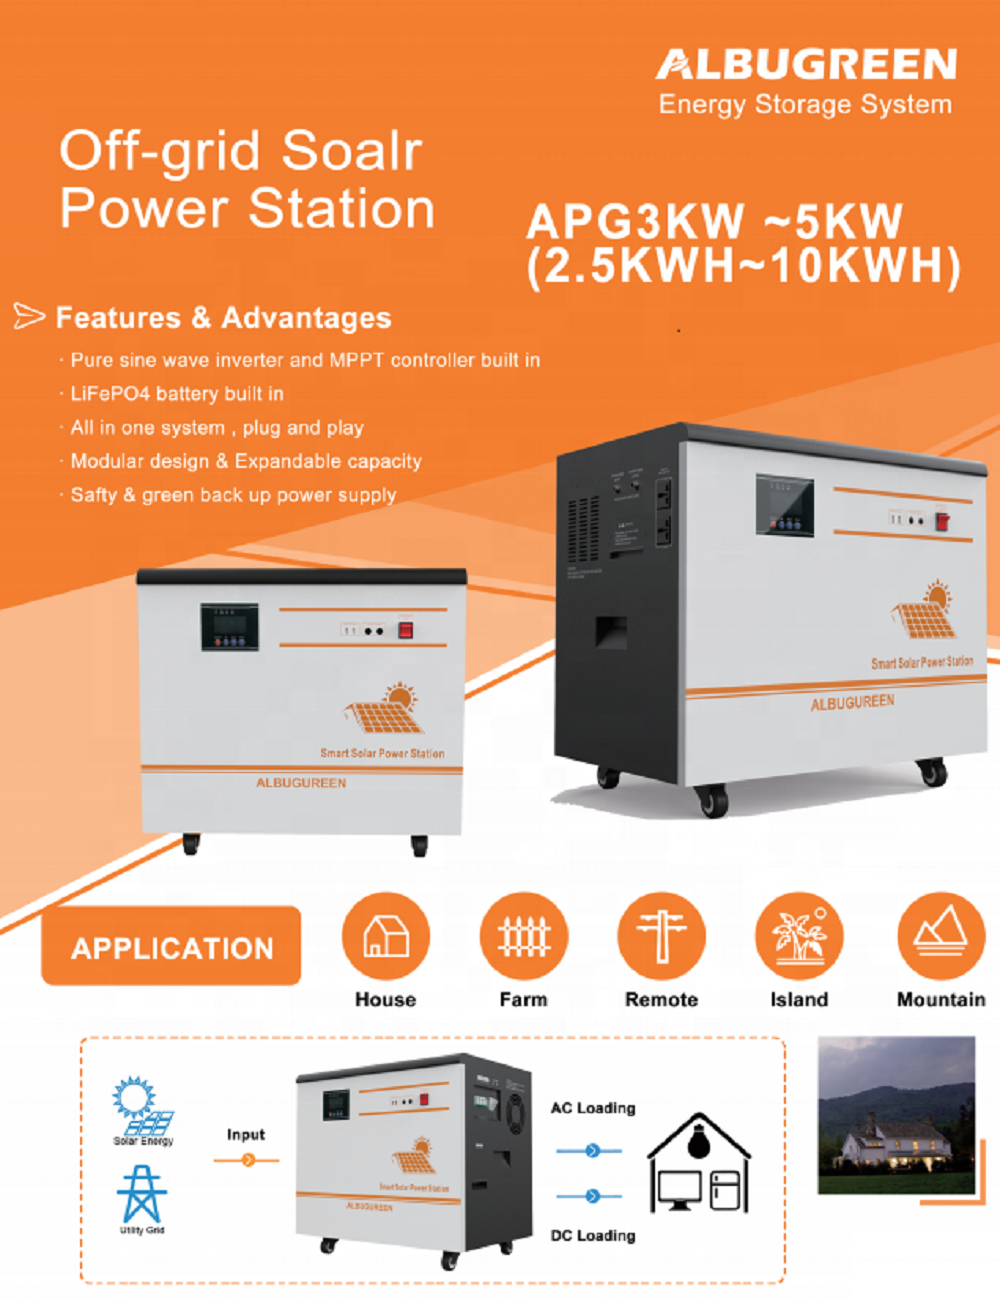 3000w with Rechargeable Power in One Solar Power System for Home